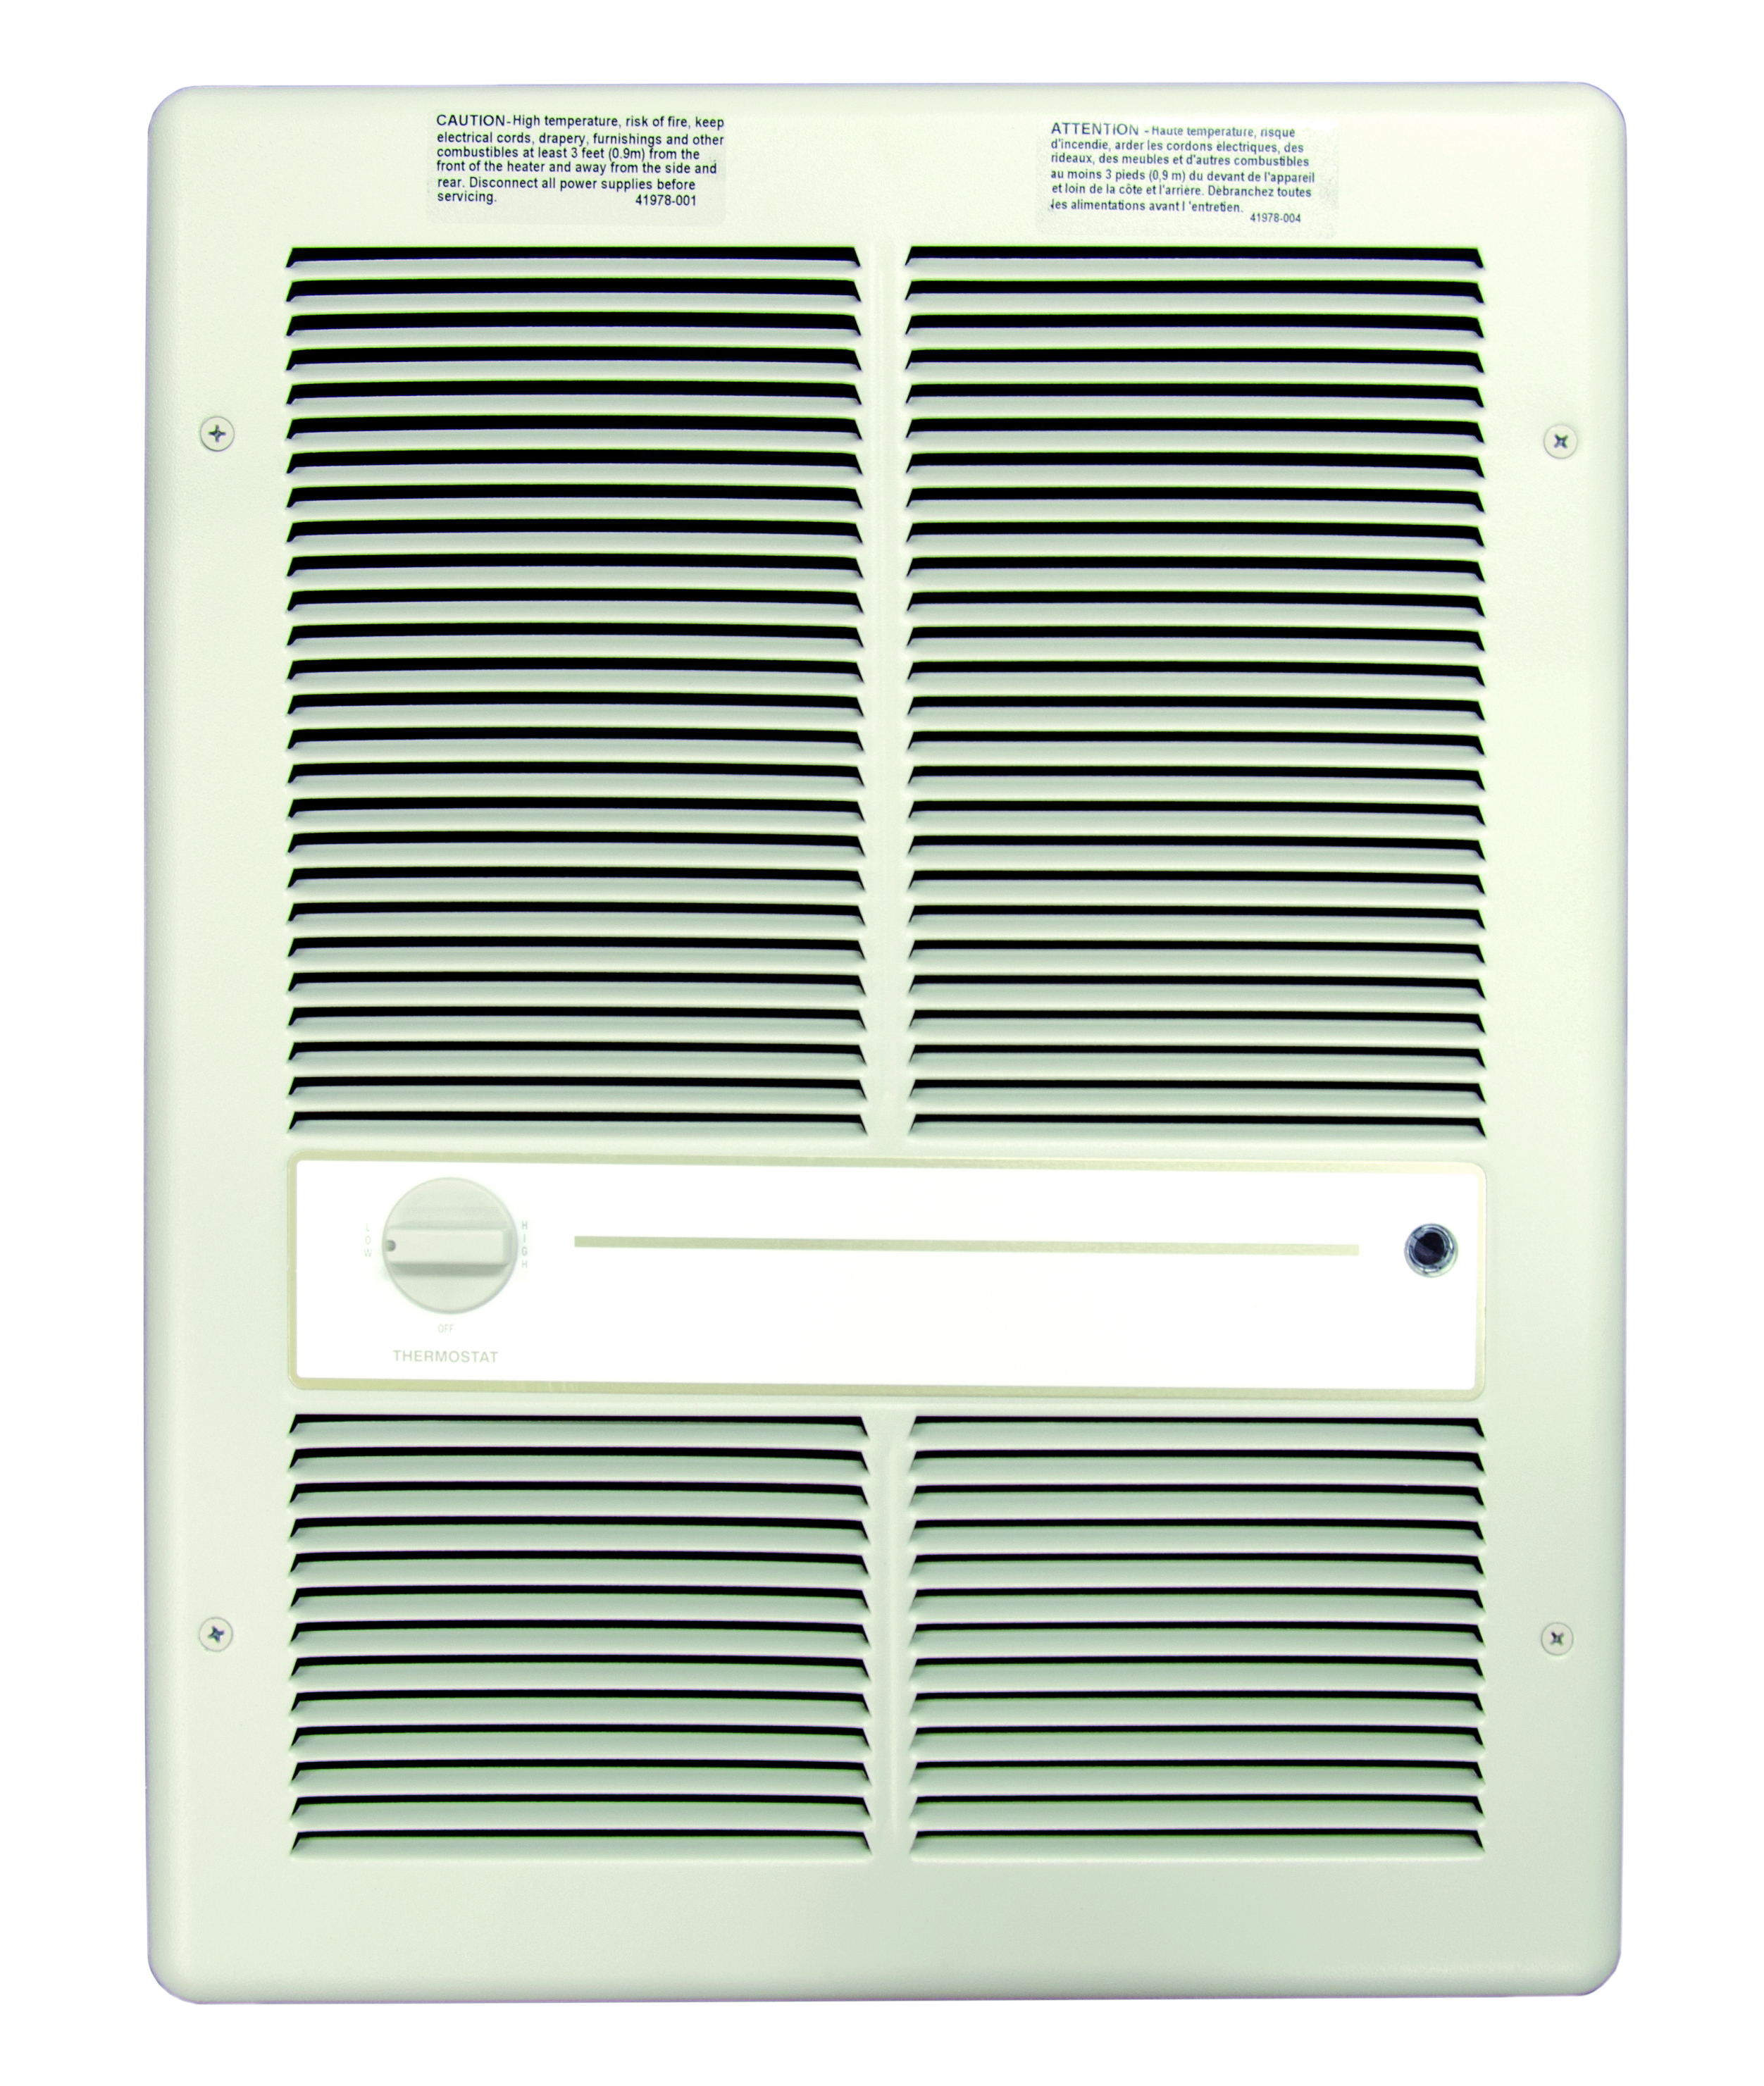 Fan Forced Wall Heater, Maximum Operating Temperature- 90 (Thermostat) DEG F 1 PH, 4000 WTT, 277 V, Wall Mounting, Steel Housing Material, Dimensions- 14-3/16 Width X 19-15/16 Height X 4 Depth IN, BTU Rating- 13648, 14.4 AMP, Ivory